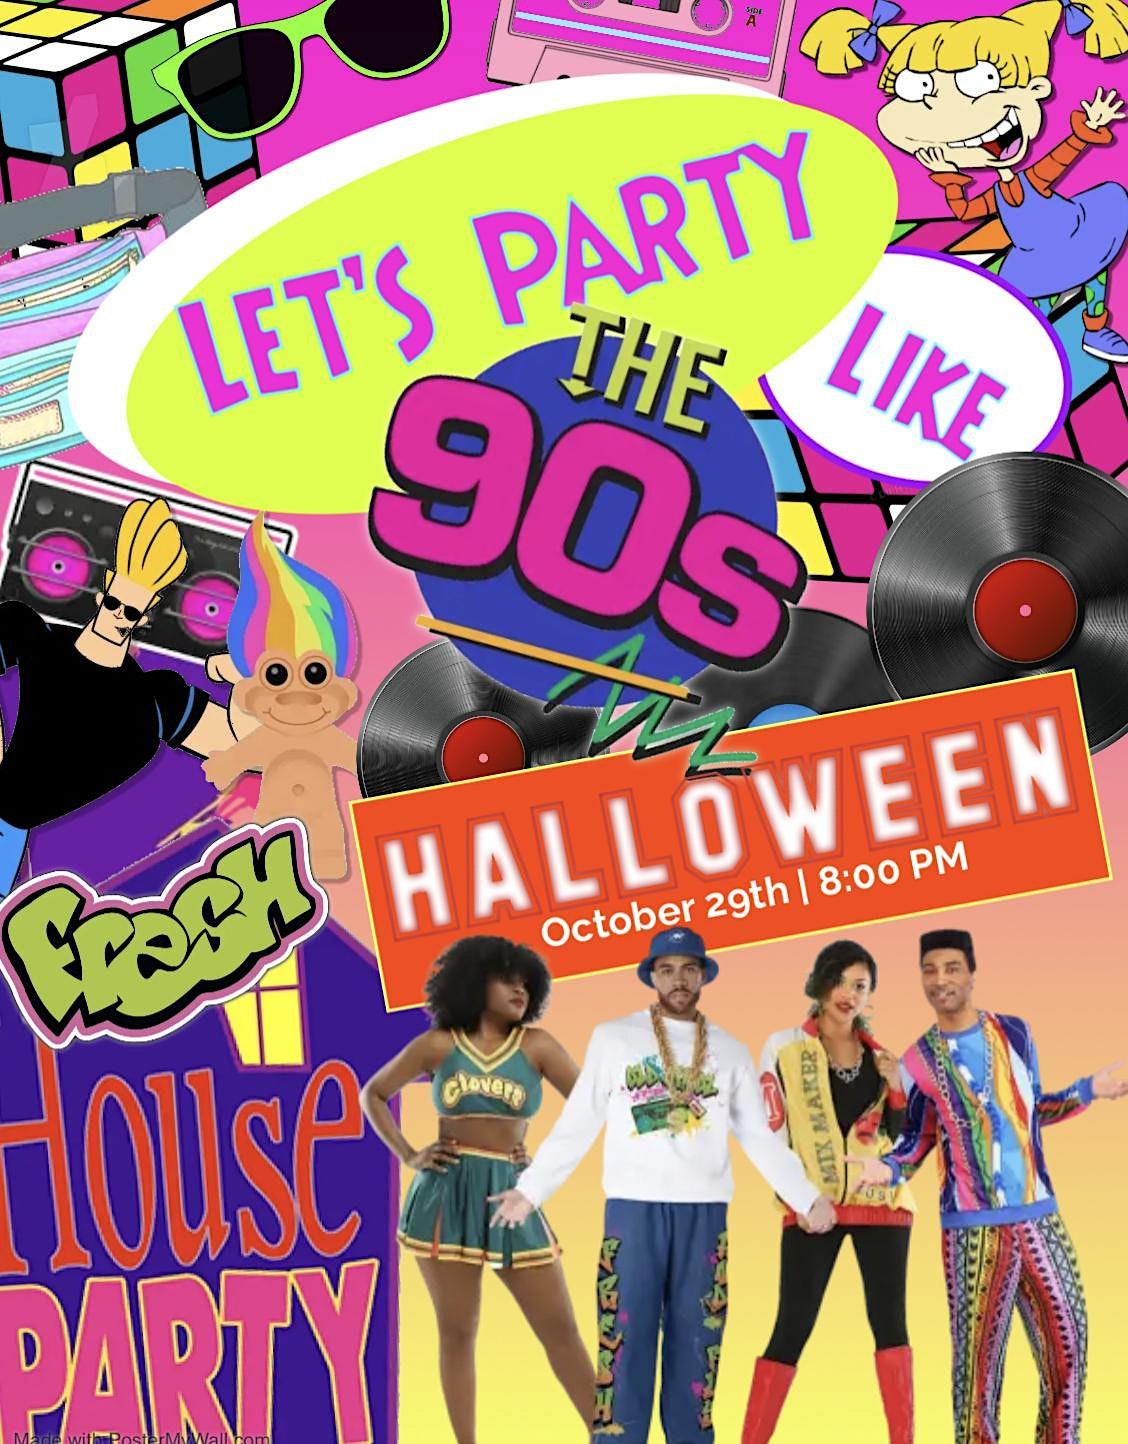 90’s Halloween Party
Sat Oct 29, 8:00 PM - Sat Oct 29, 11:00 PM
in 8 days